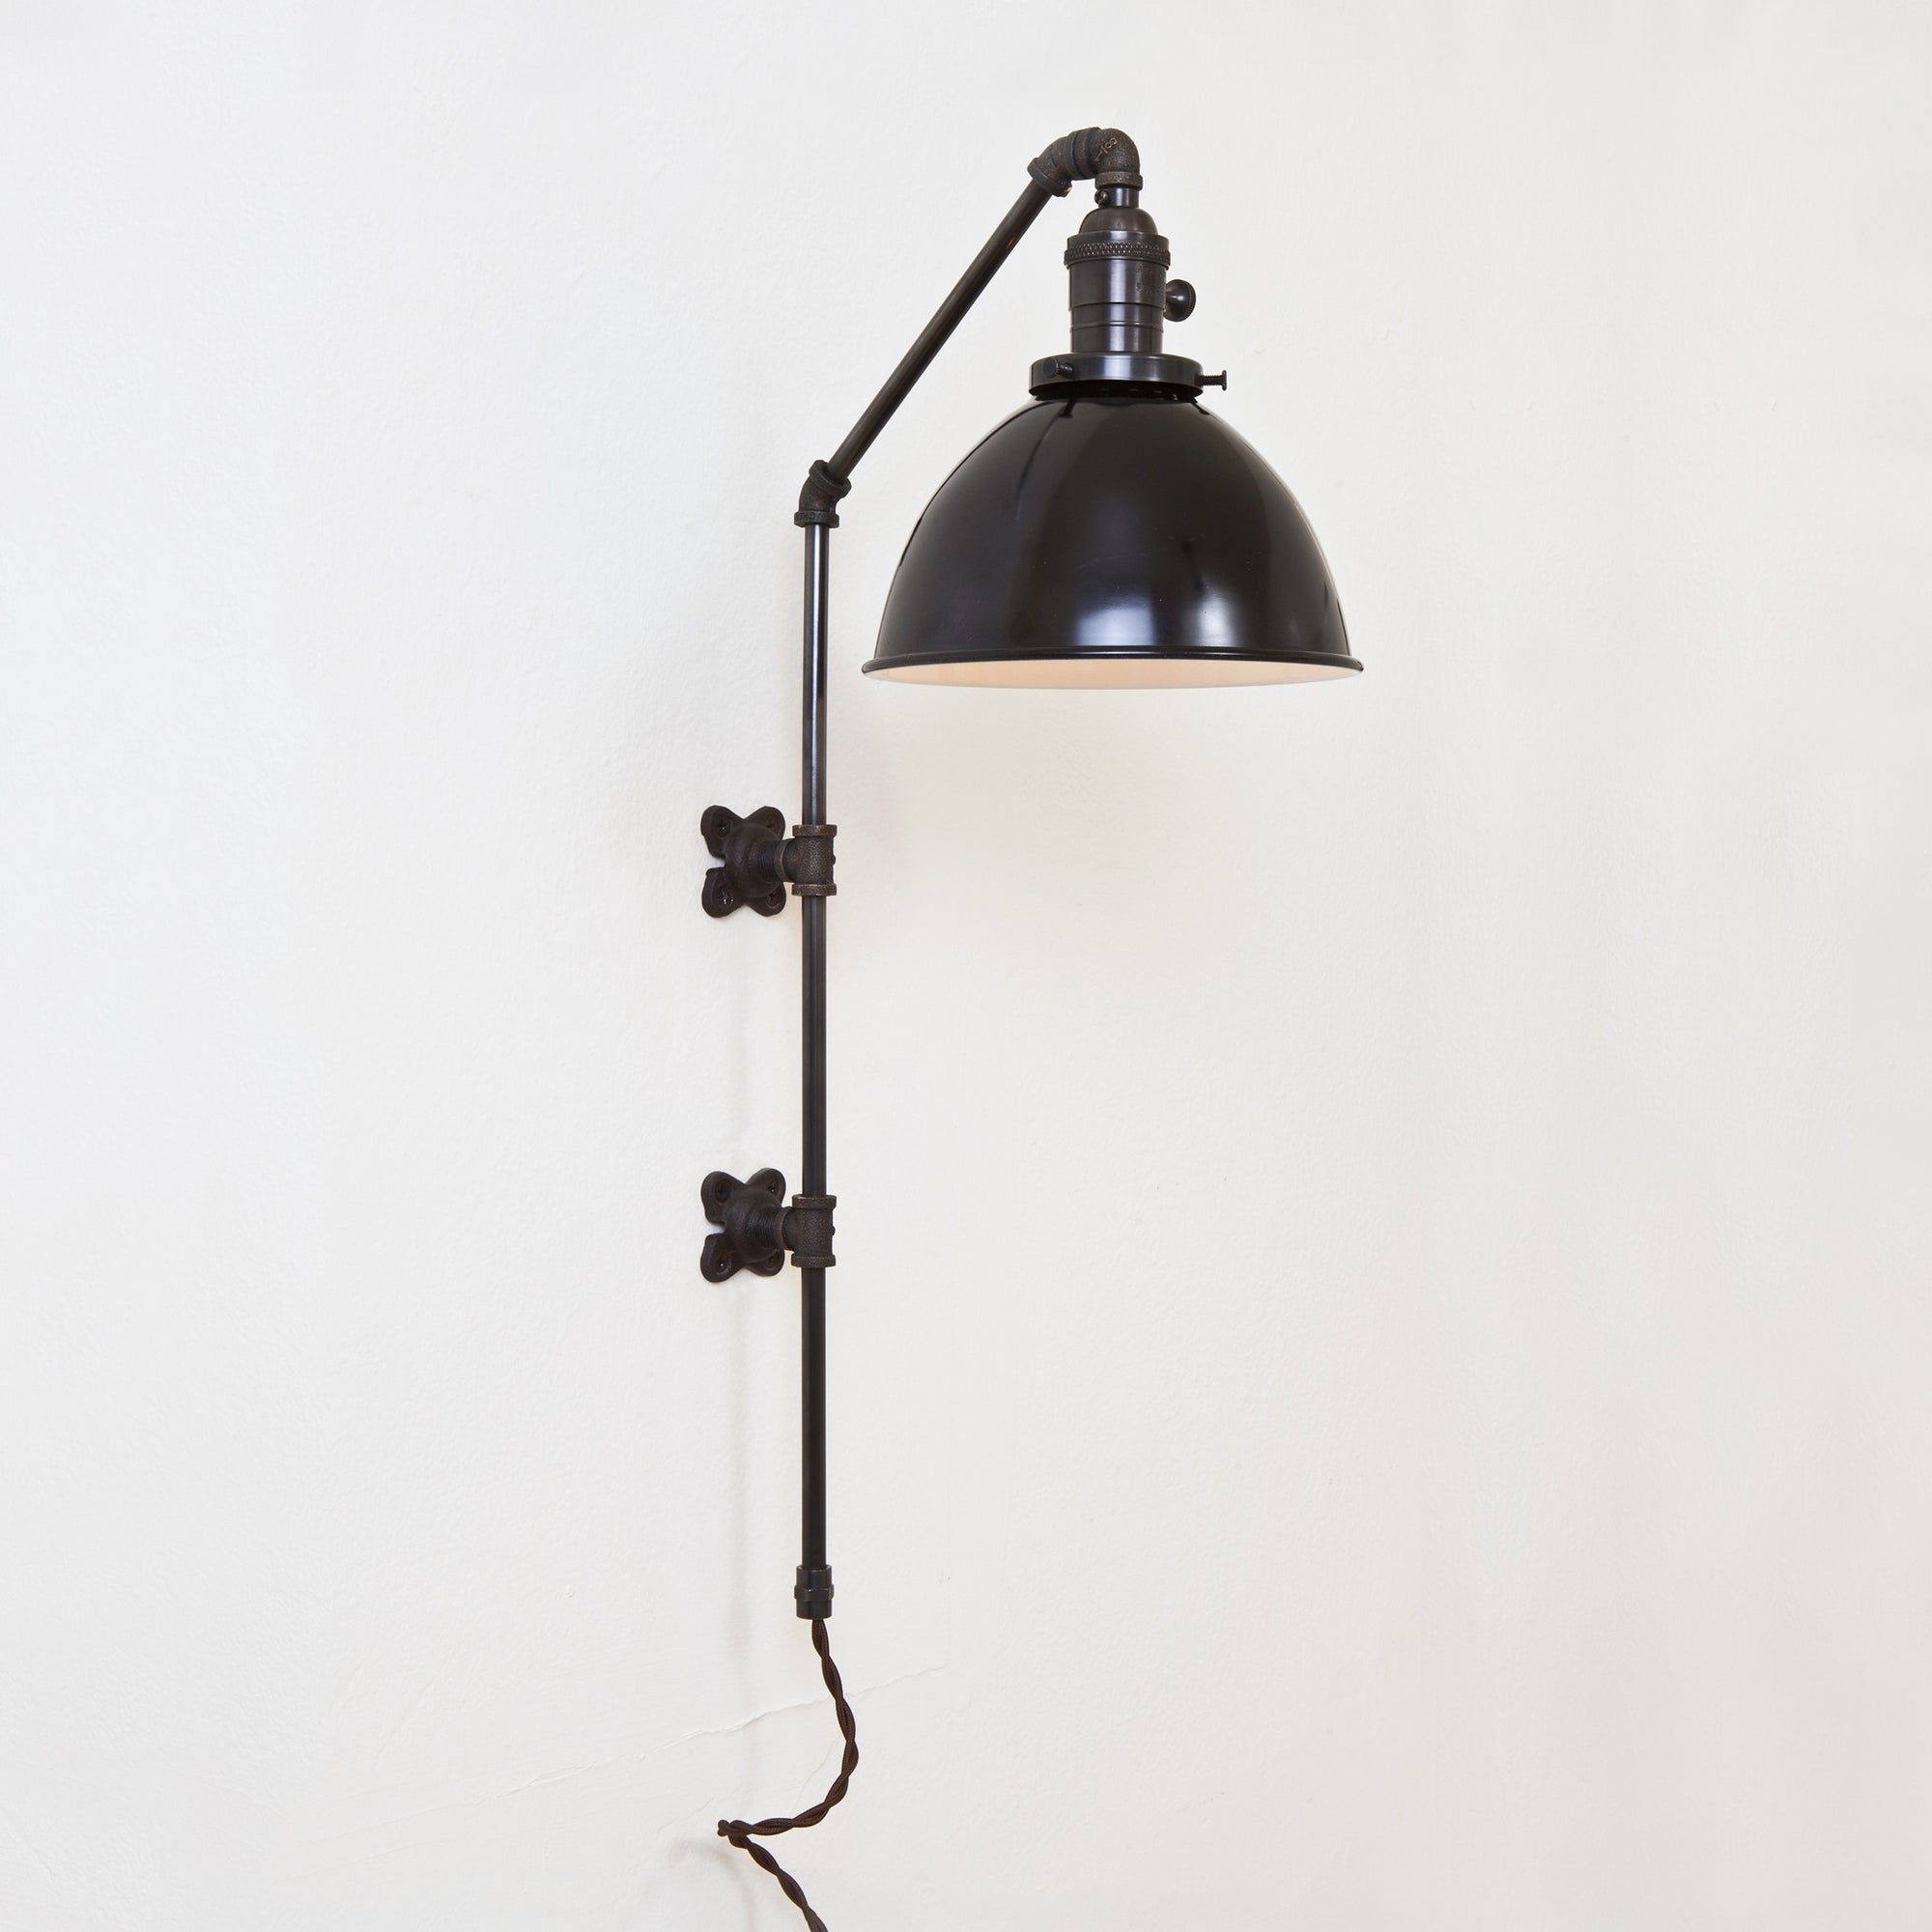 Brass Pipe Wall Sconce - Black Dome Shade